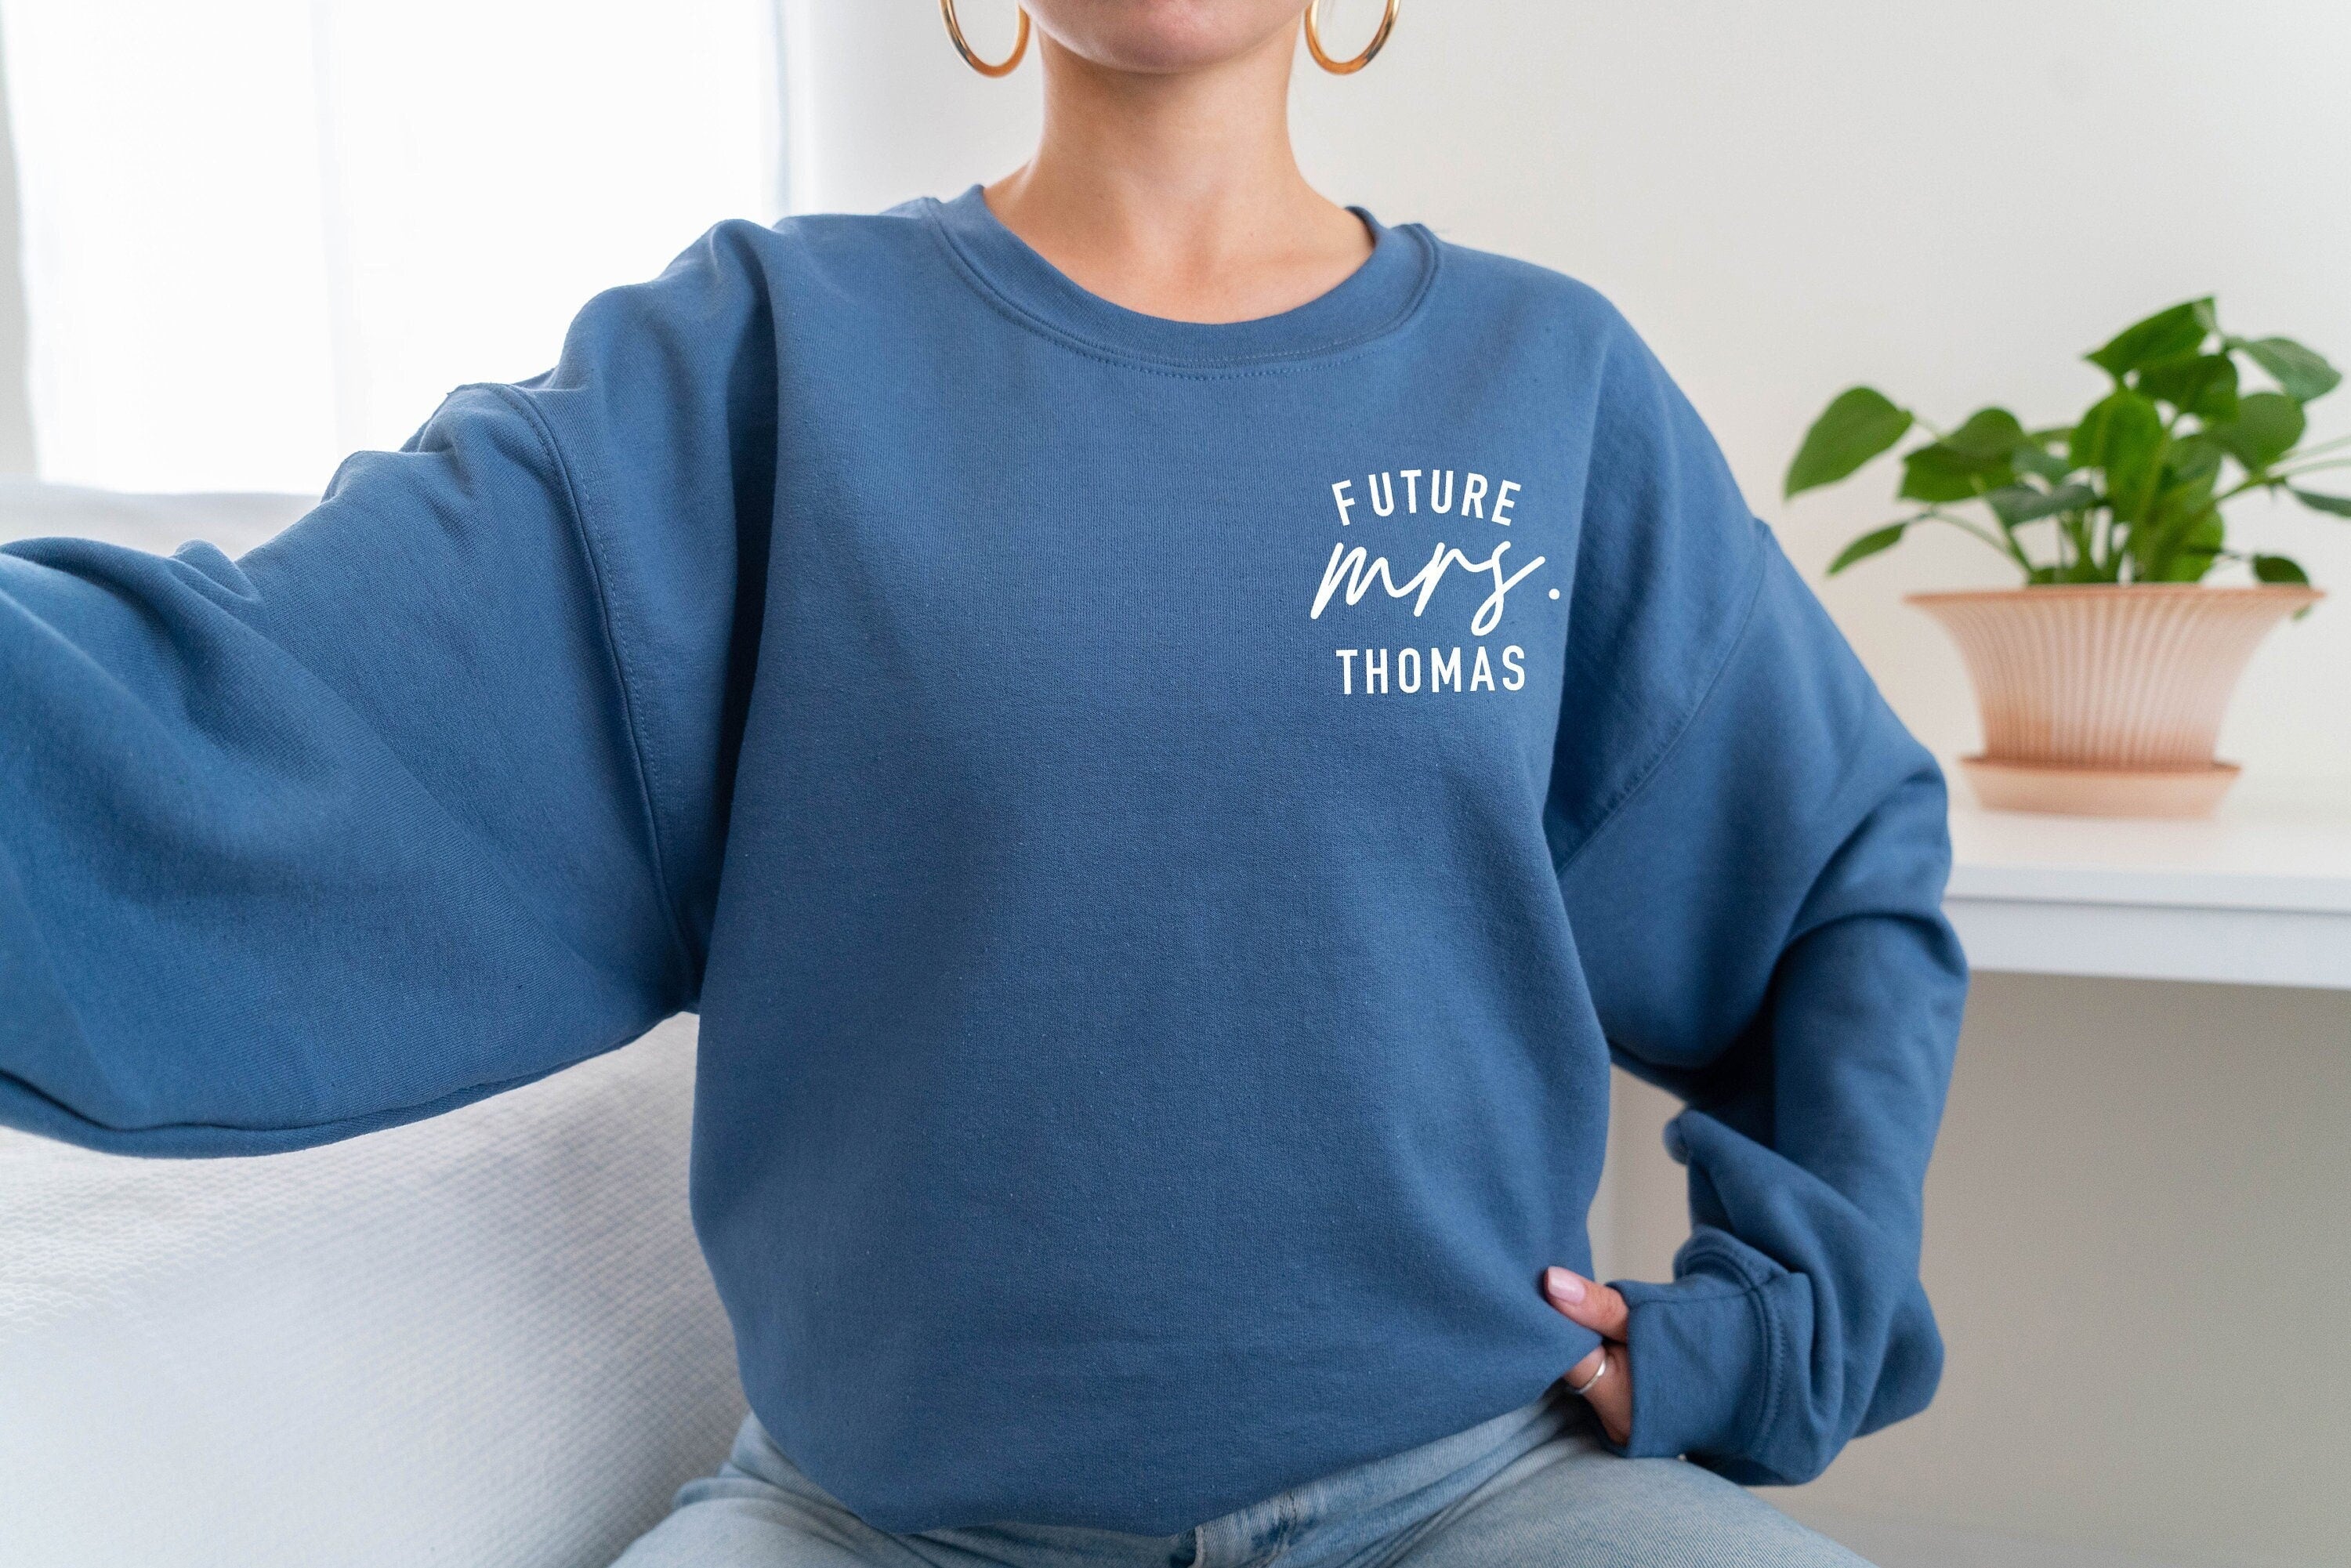 Custom Bridal Gift: 'Future Mrs' Sweatshirt for the Bride-to-Be